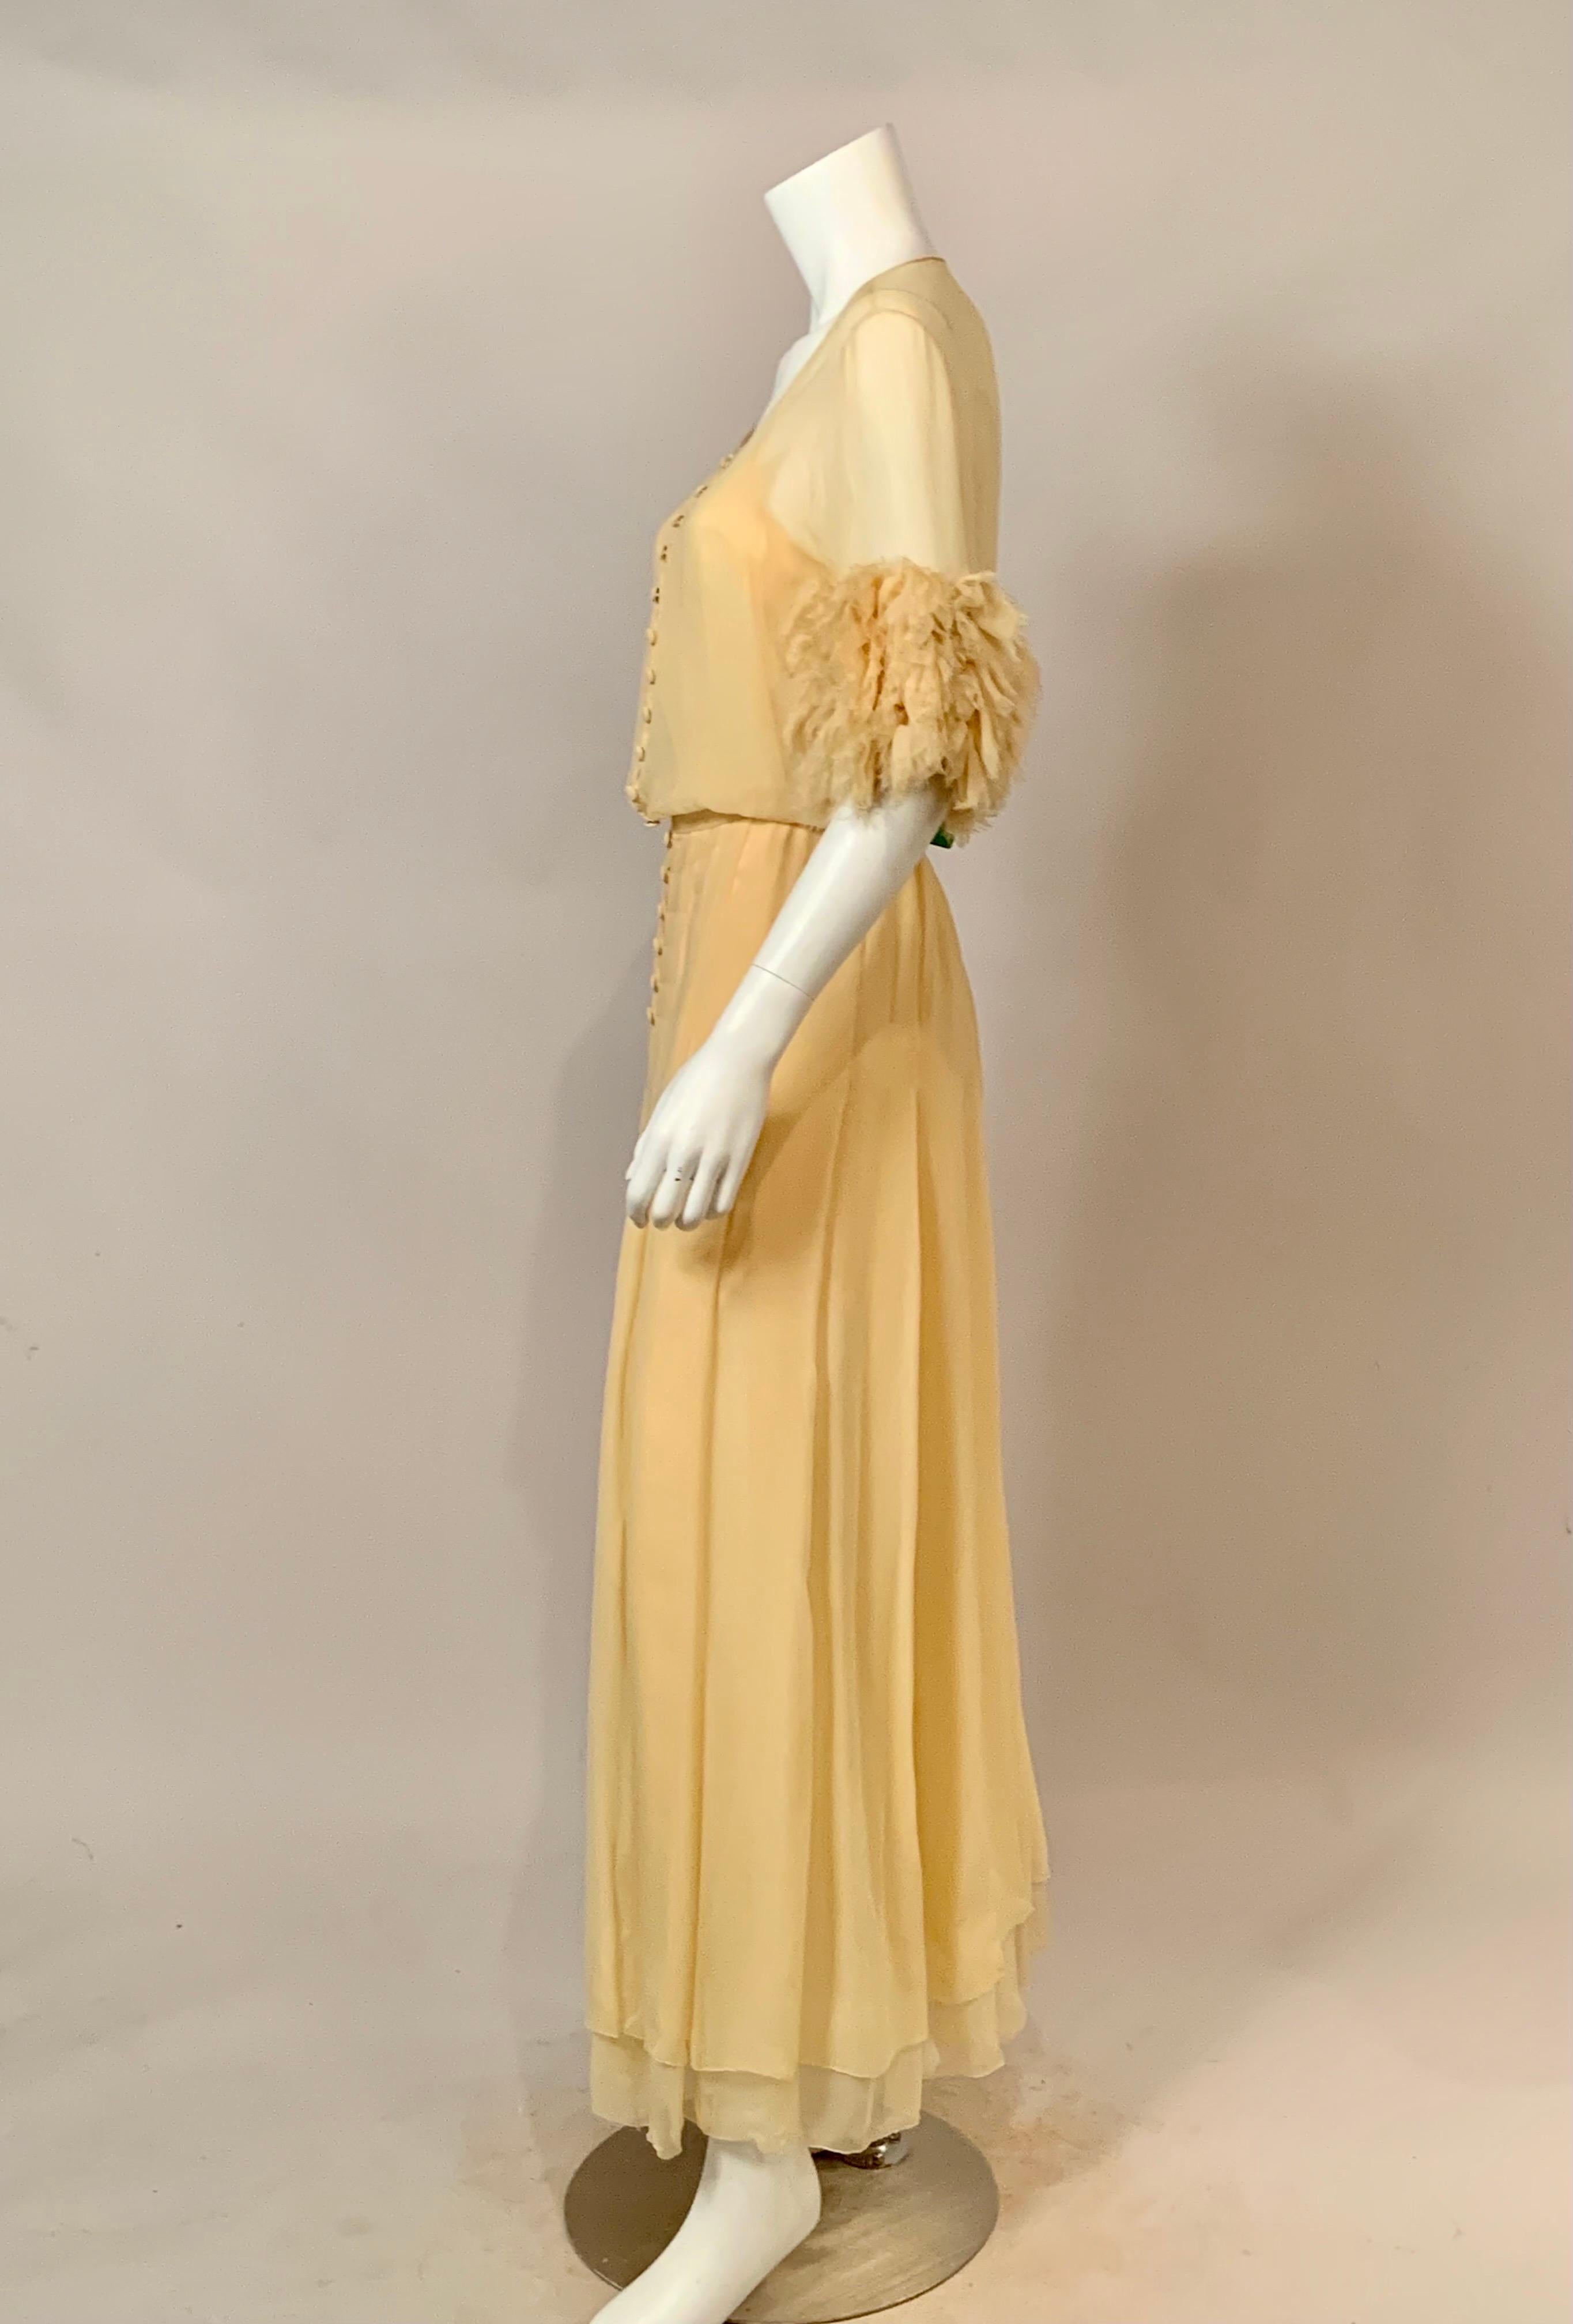 1984 Chanel by Karl Lagerfeld Butter Yellow Silk Chiffon Evening Gown Never Worn 4